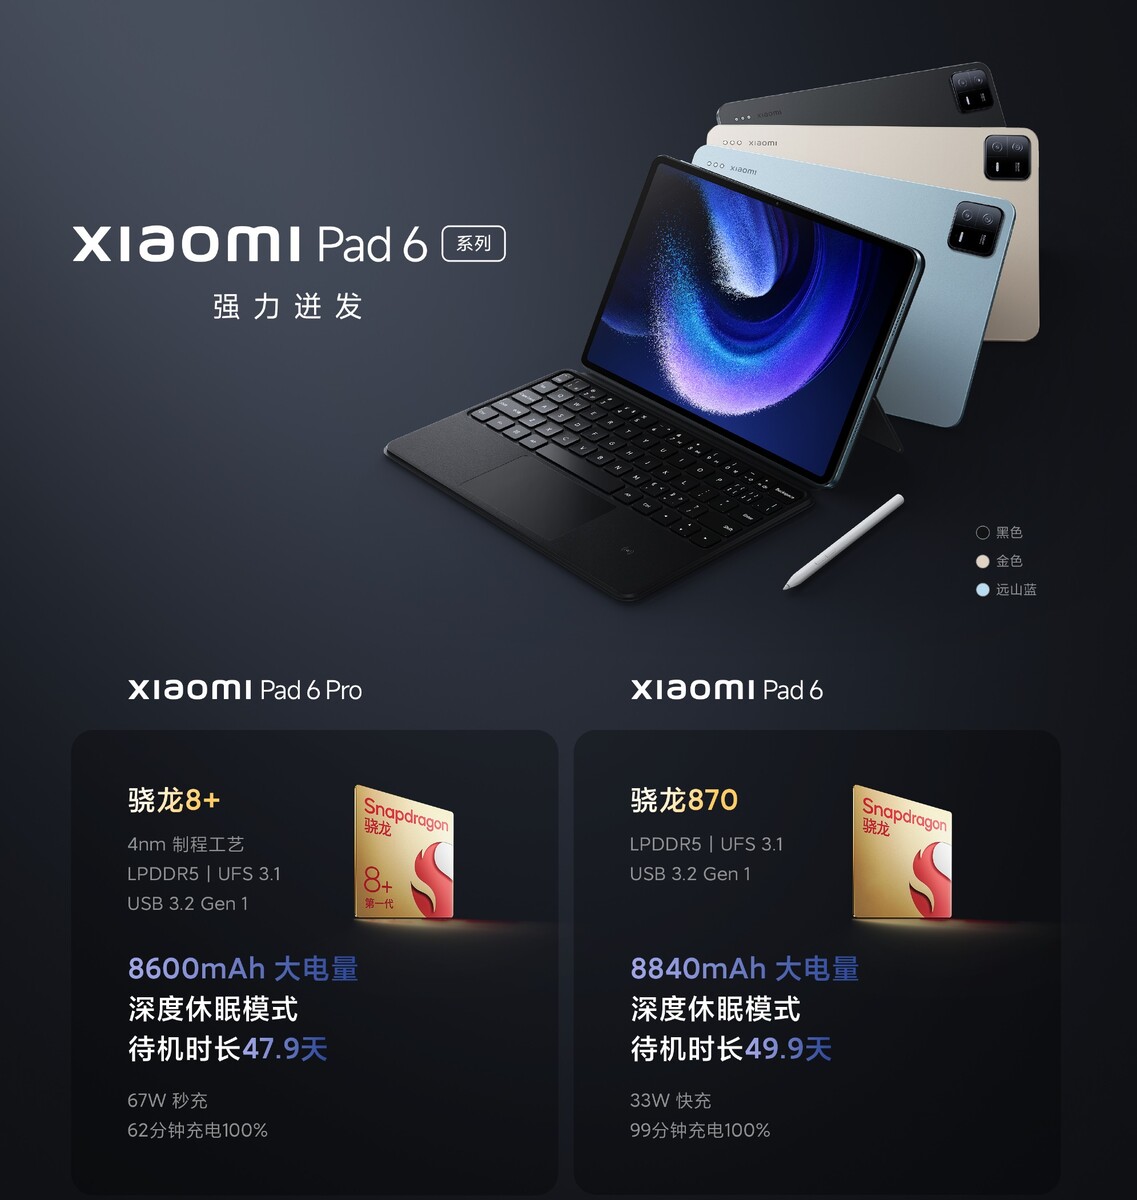 Xiaomi Pad 6 series launched today, Xiaomi Pad 6 and Xiaomi Pad 6 Pro! 